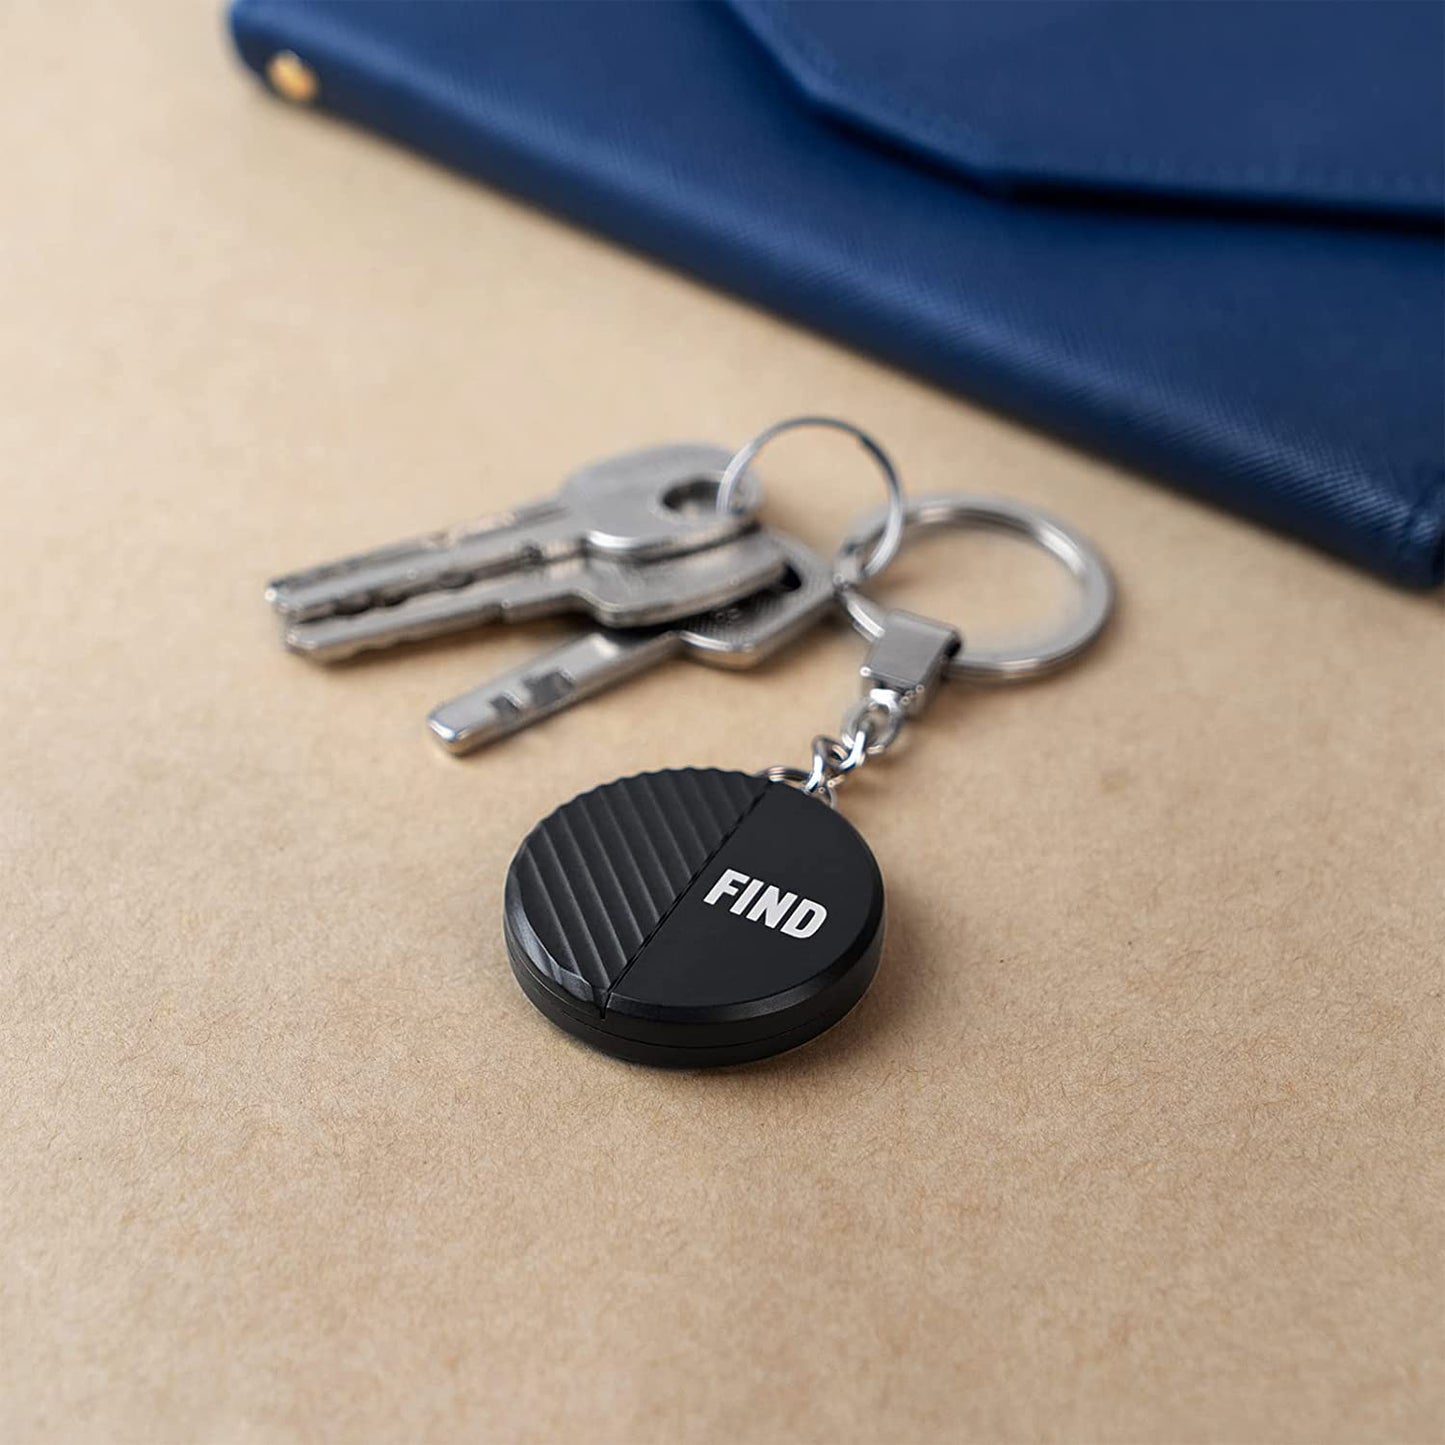 Nutale Key Finder, Bluetooth Tracker Item Locator with Key Chain for Keys Pet Wallets or Backpacks and Tablets, Batteries Include (F9XT- 4 Pack)